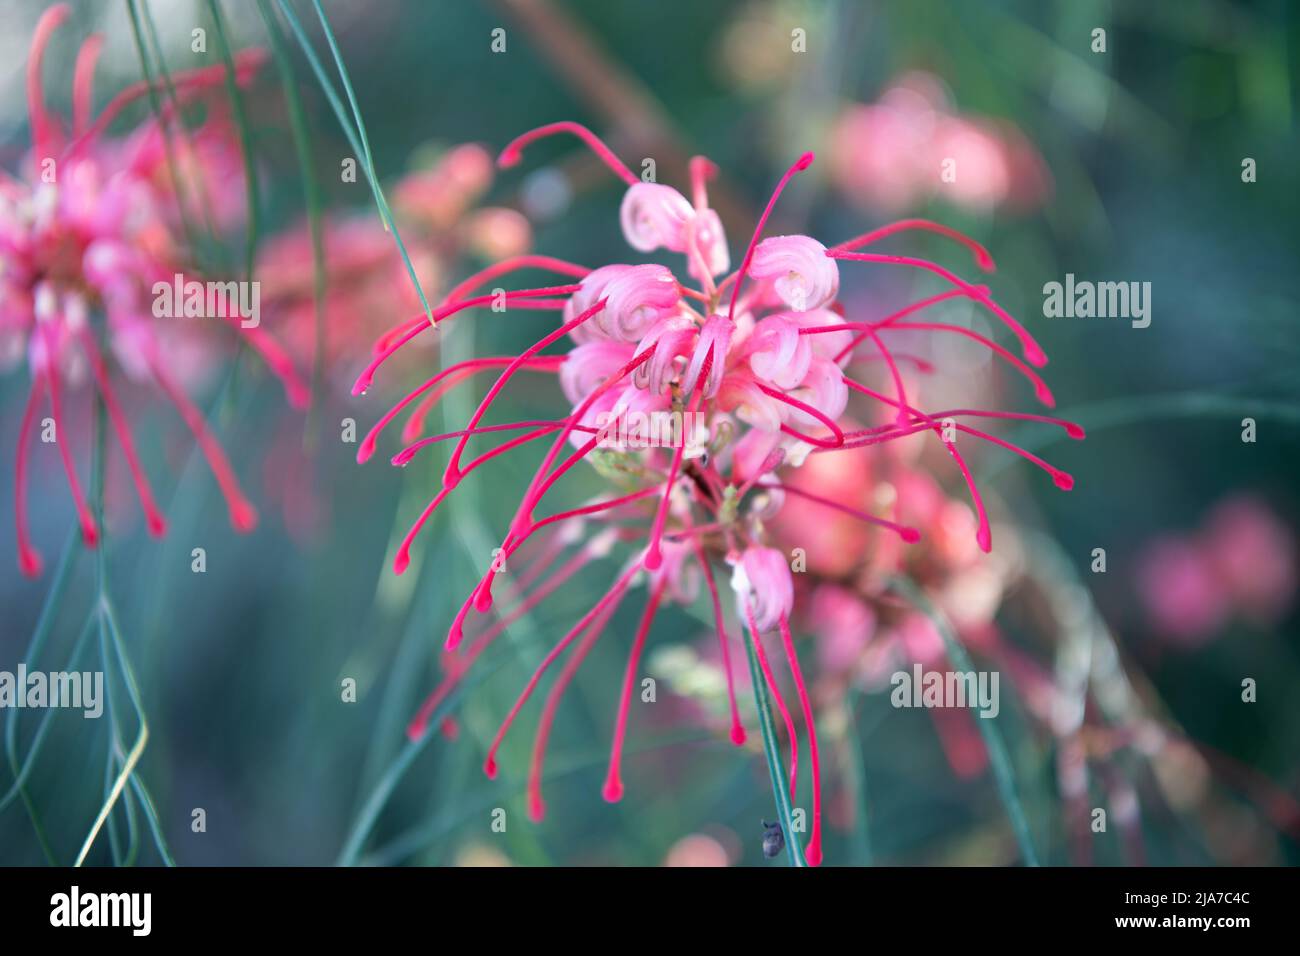 Spider lily lycoris radiata flowers blooming on blurred nature in spring Stock Photo